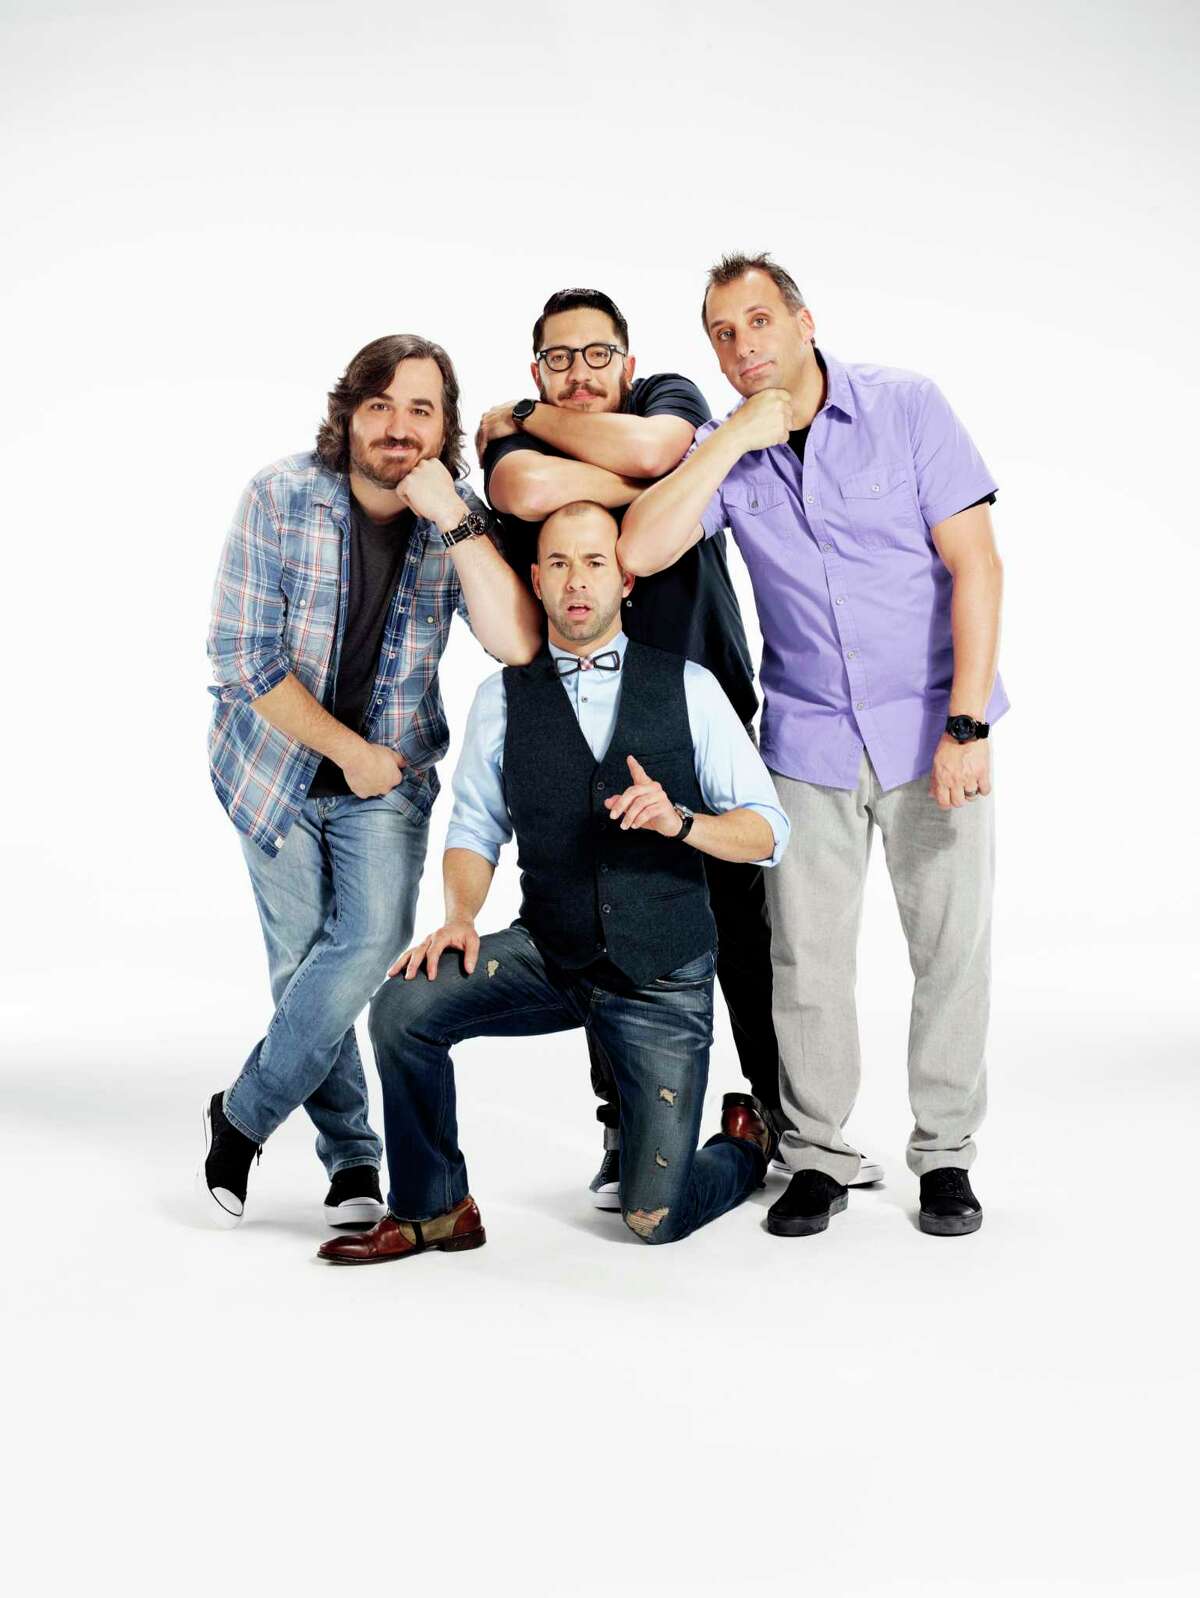 Impractical Jokers laugh at themselves and welcome you to join in